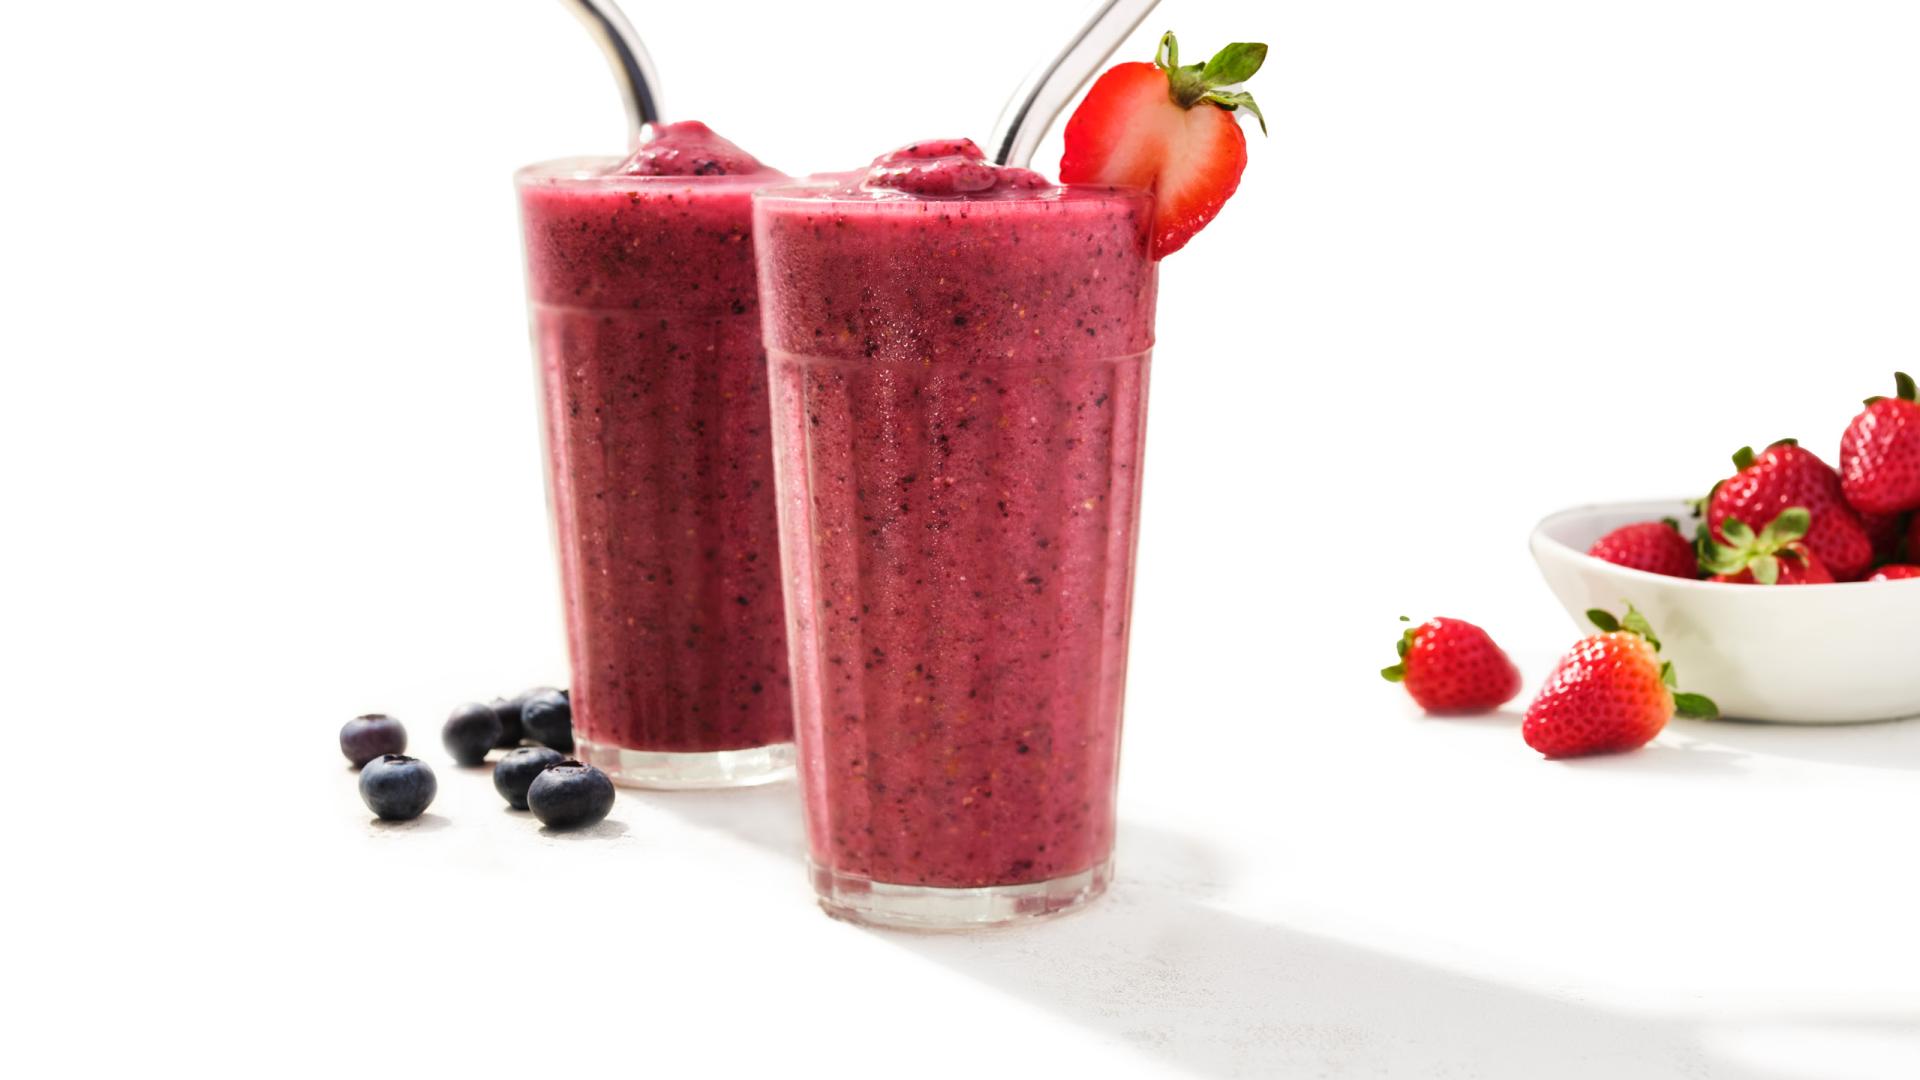 Image of a smoothie recipe called "Cell Therapy"